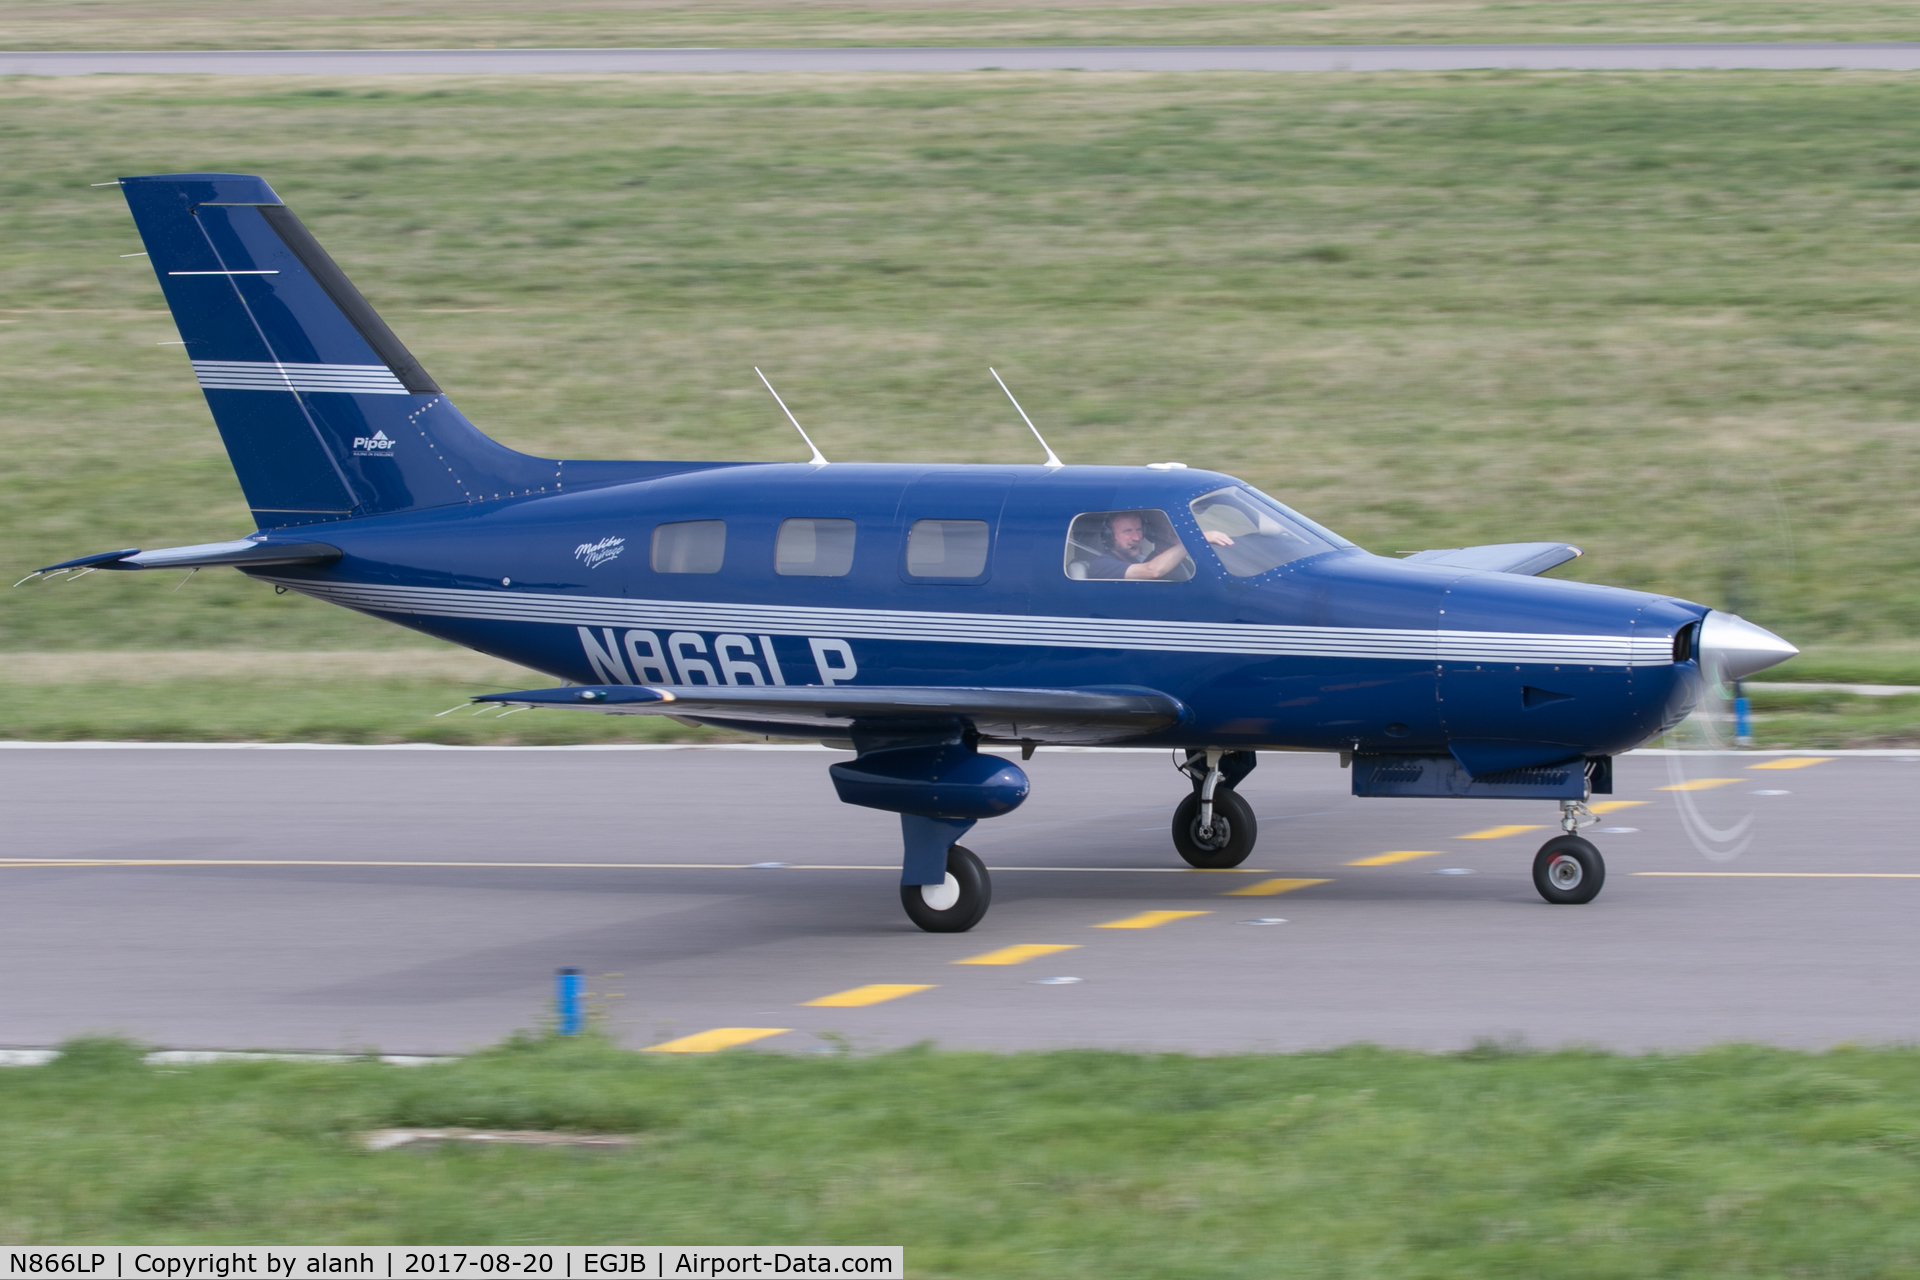 N866LP, 1997 Piper PA-46-350P Malibu Mirage C/N 4636130, Taxiing to park at Guernsey